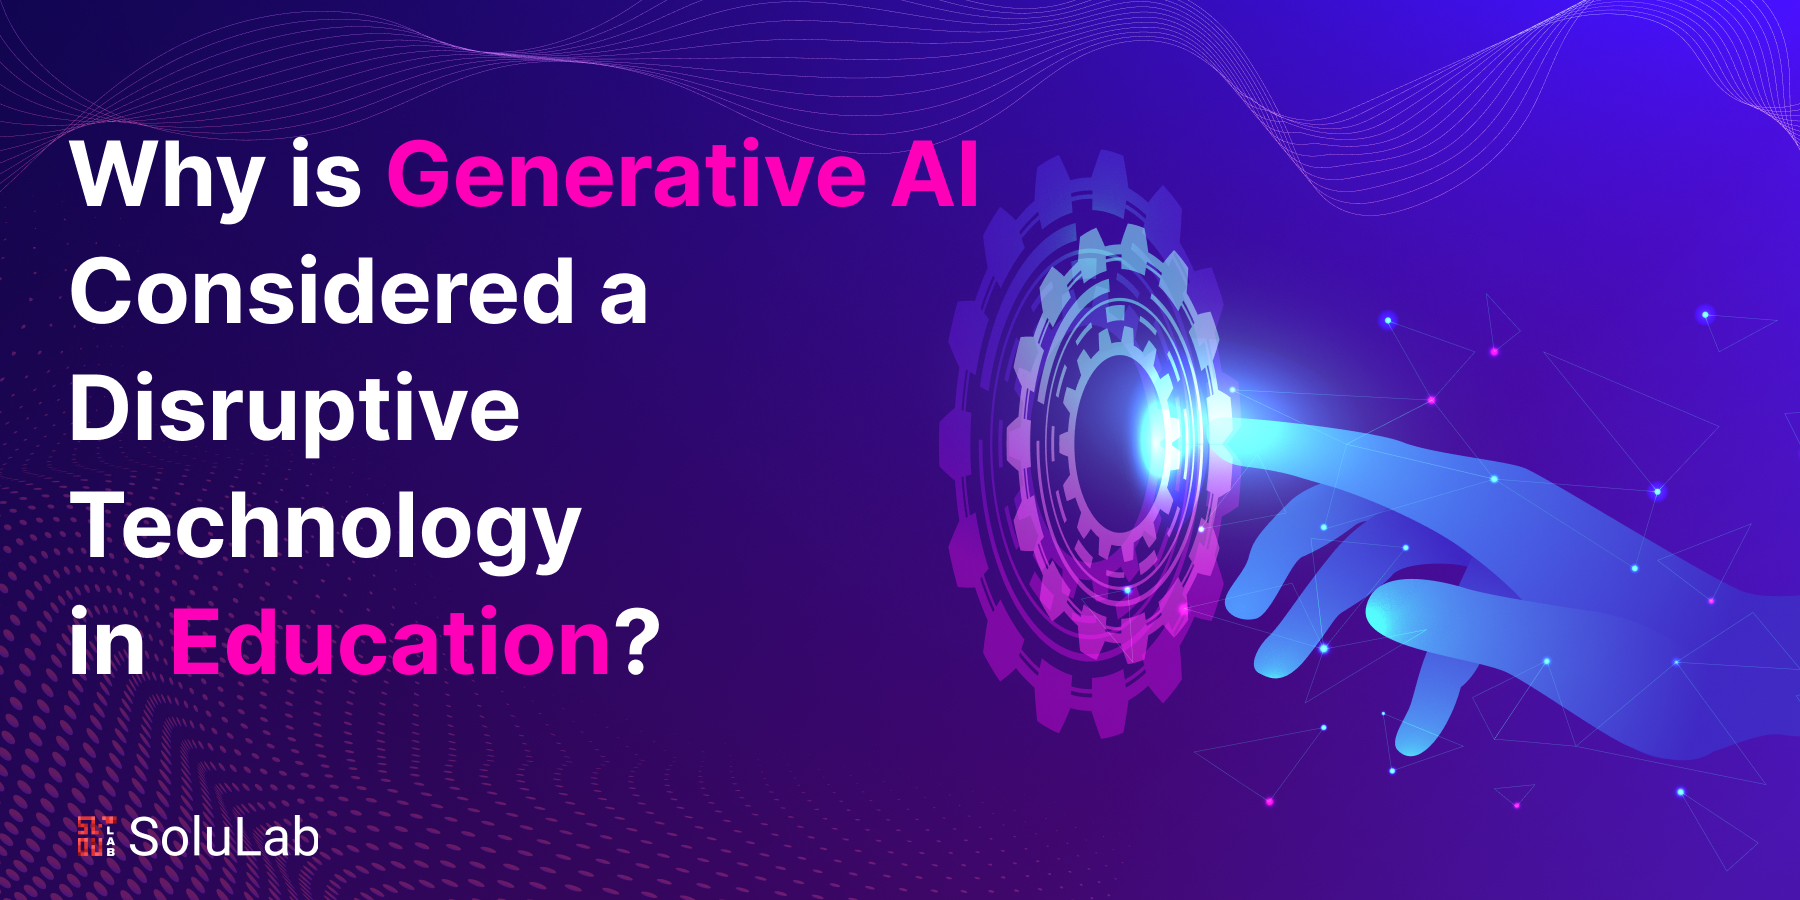 Why is Generative AI Considered a Disruptive Technology in Education?